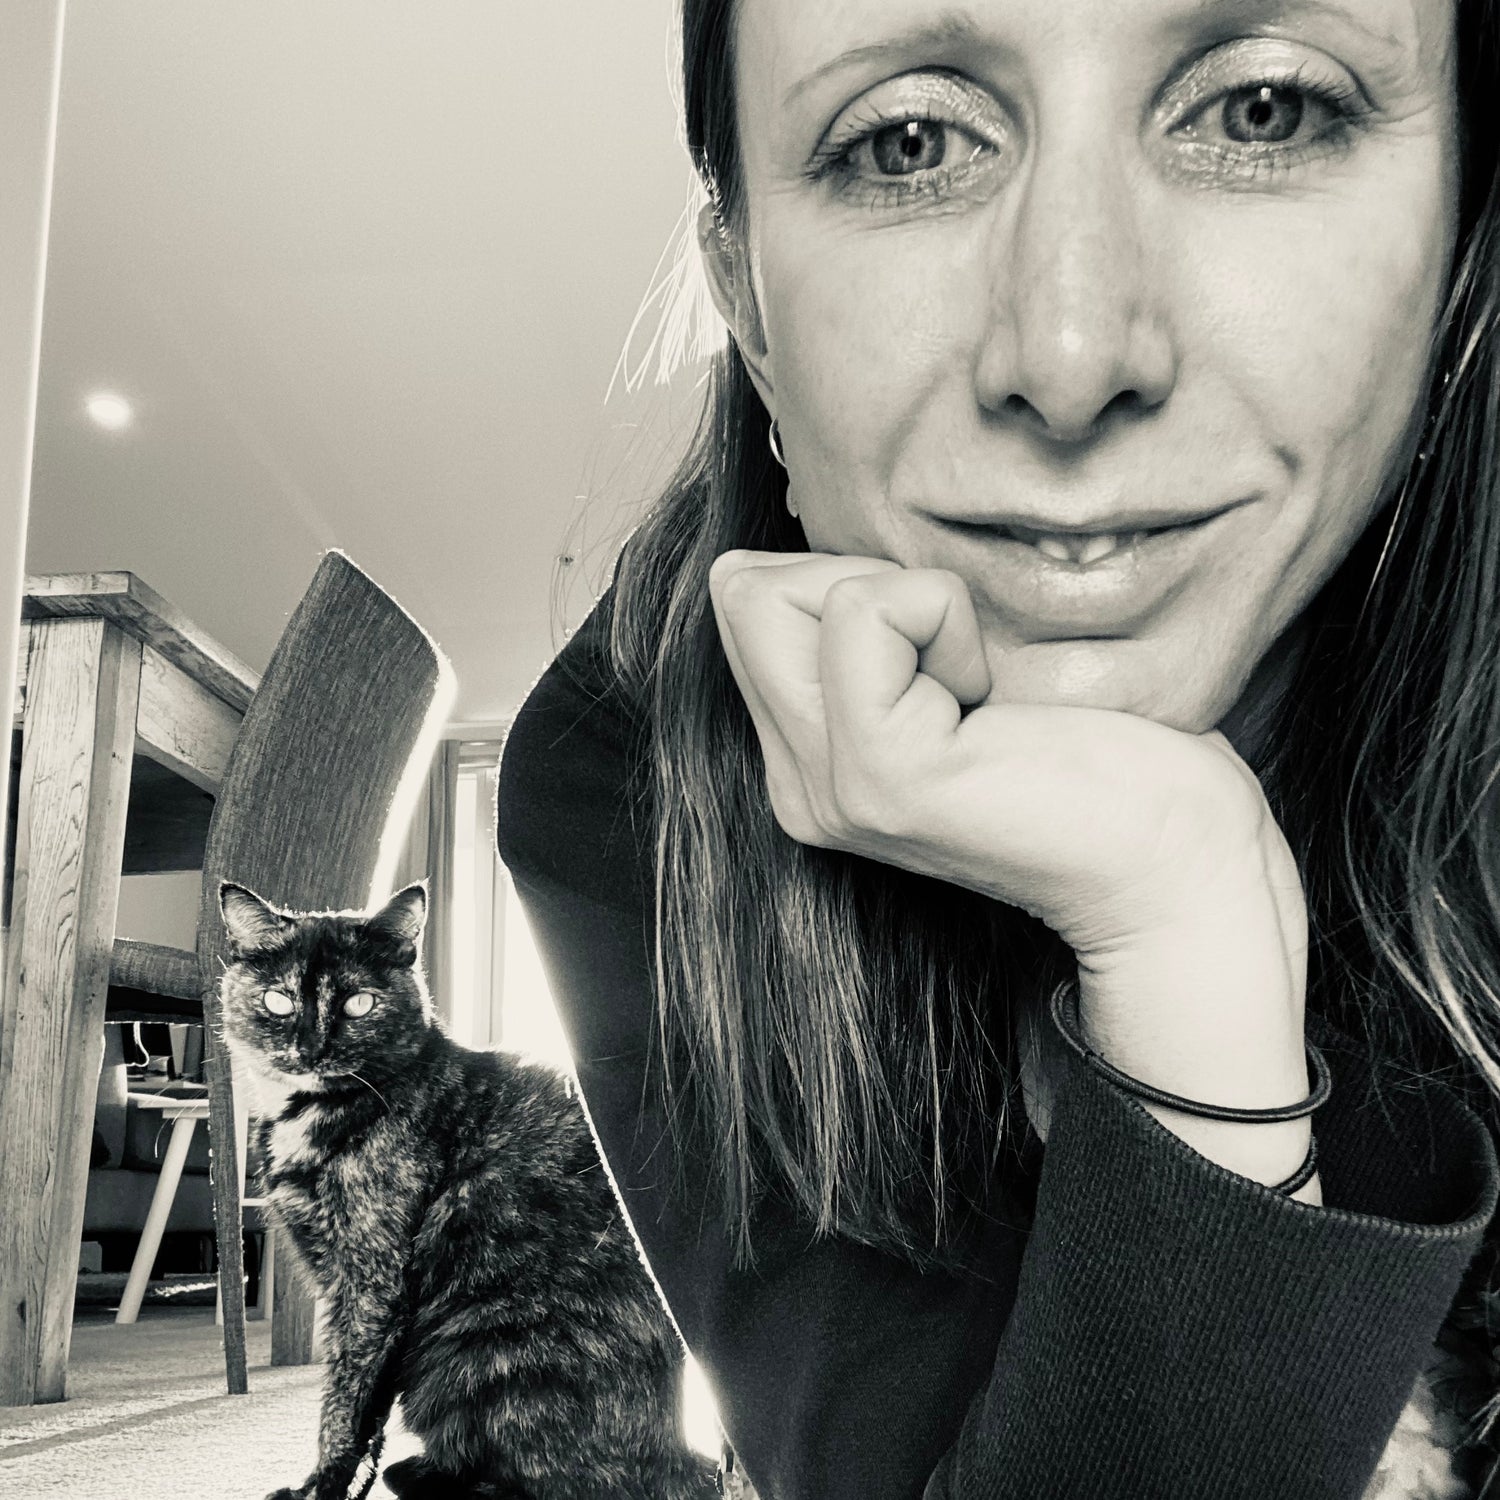 Deena Vallance (right) taking selfie with cat (left) on floor. Picture in black and white